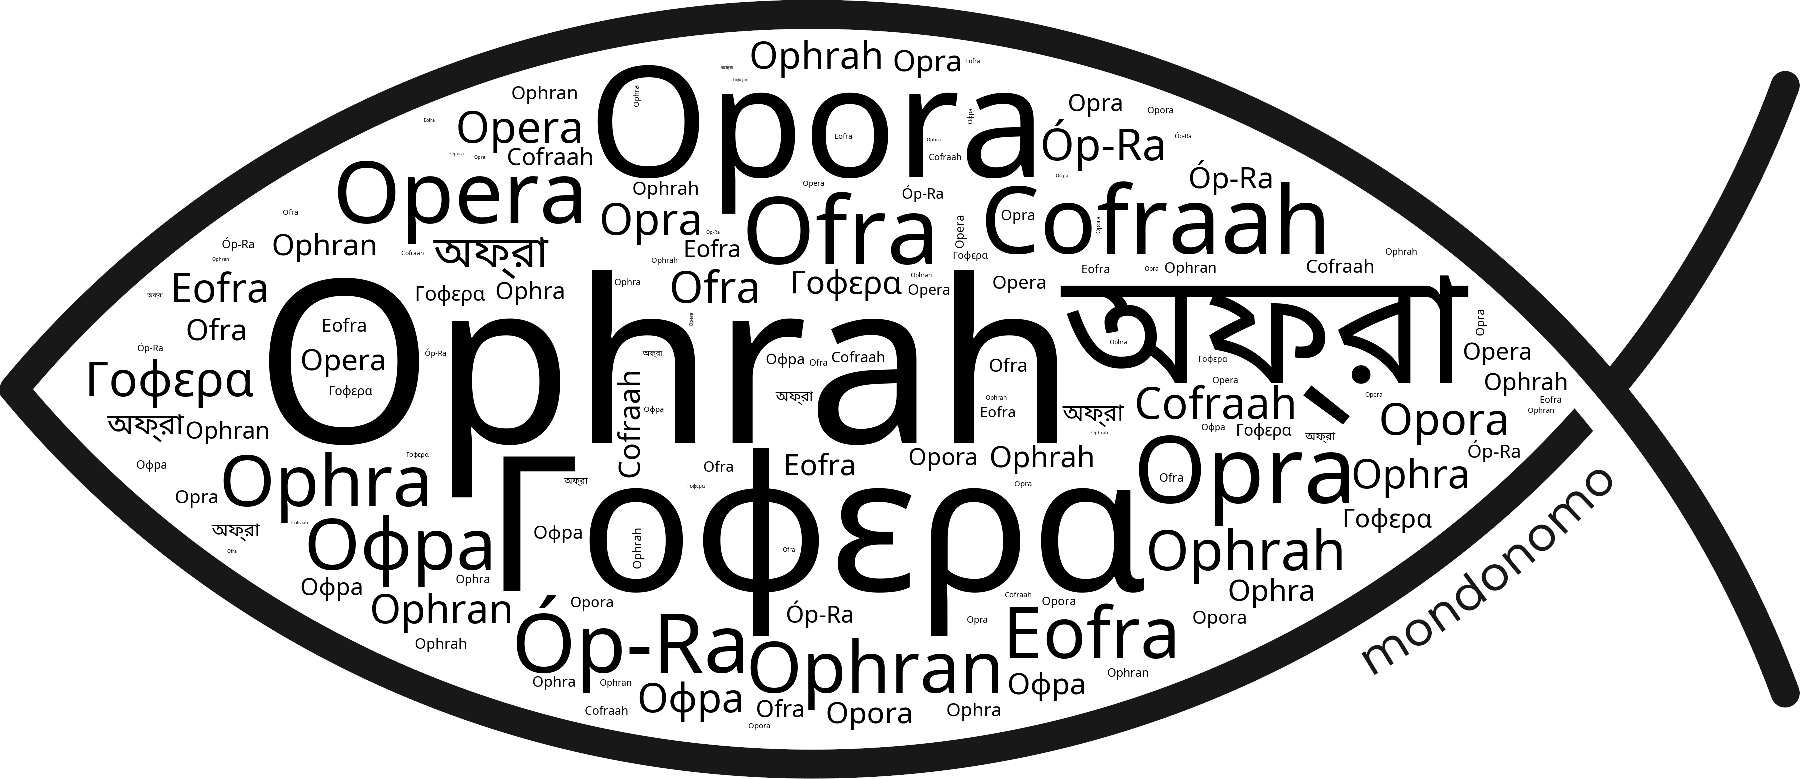 Name Ophrah in the world's Bibles